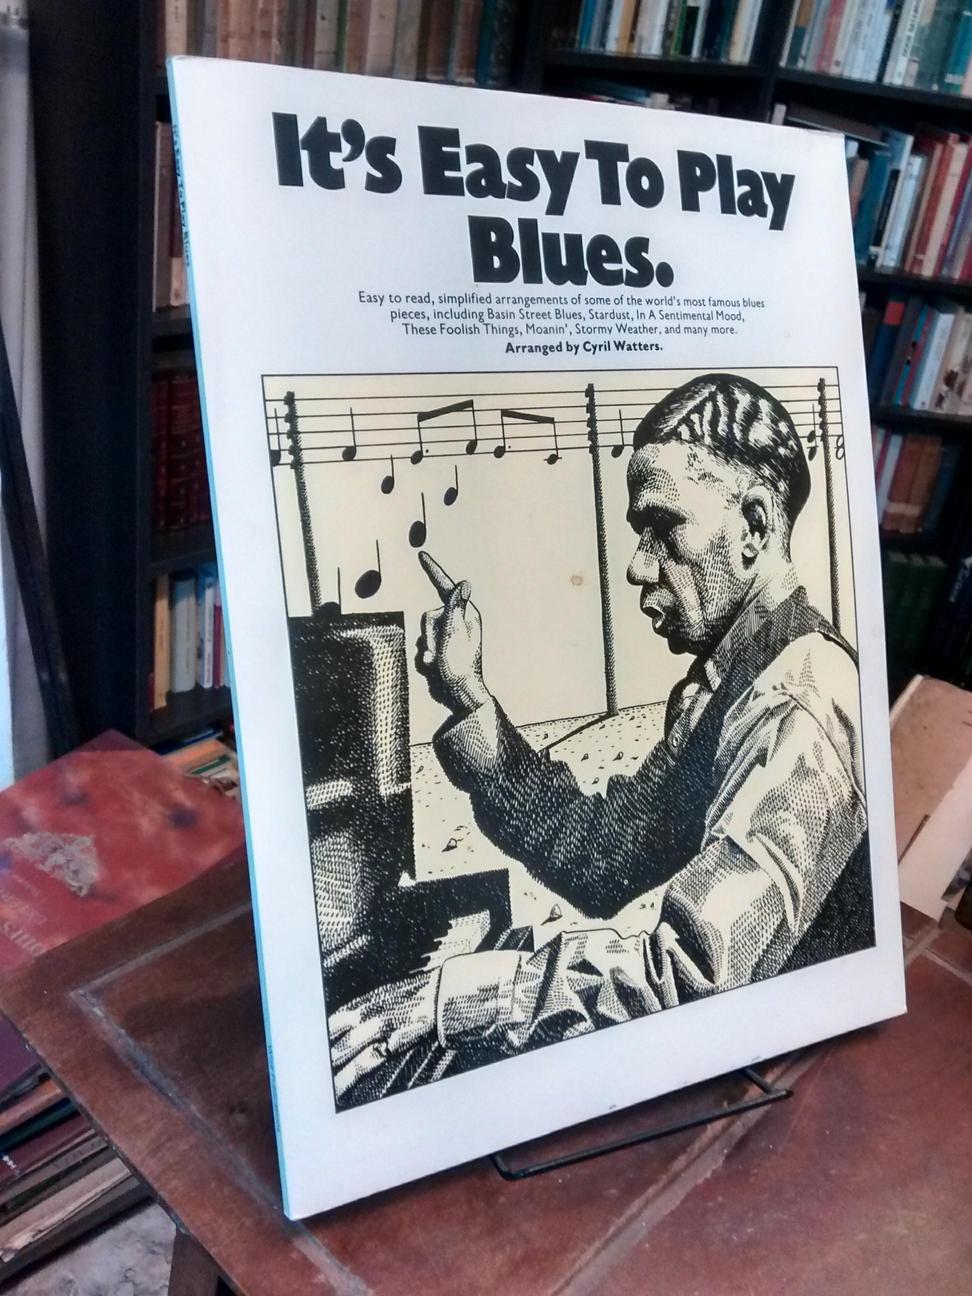 It's Easy to Play Blues - Cyril Watters